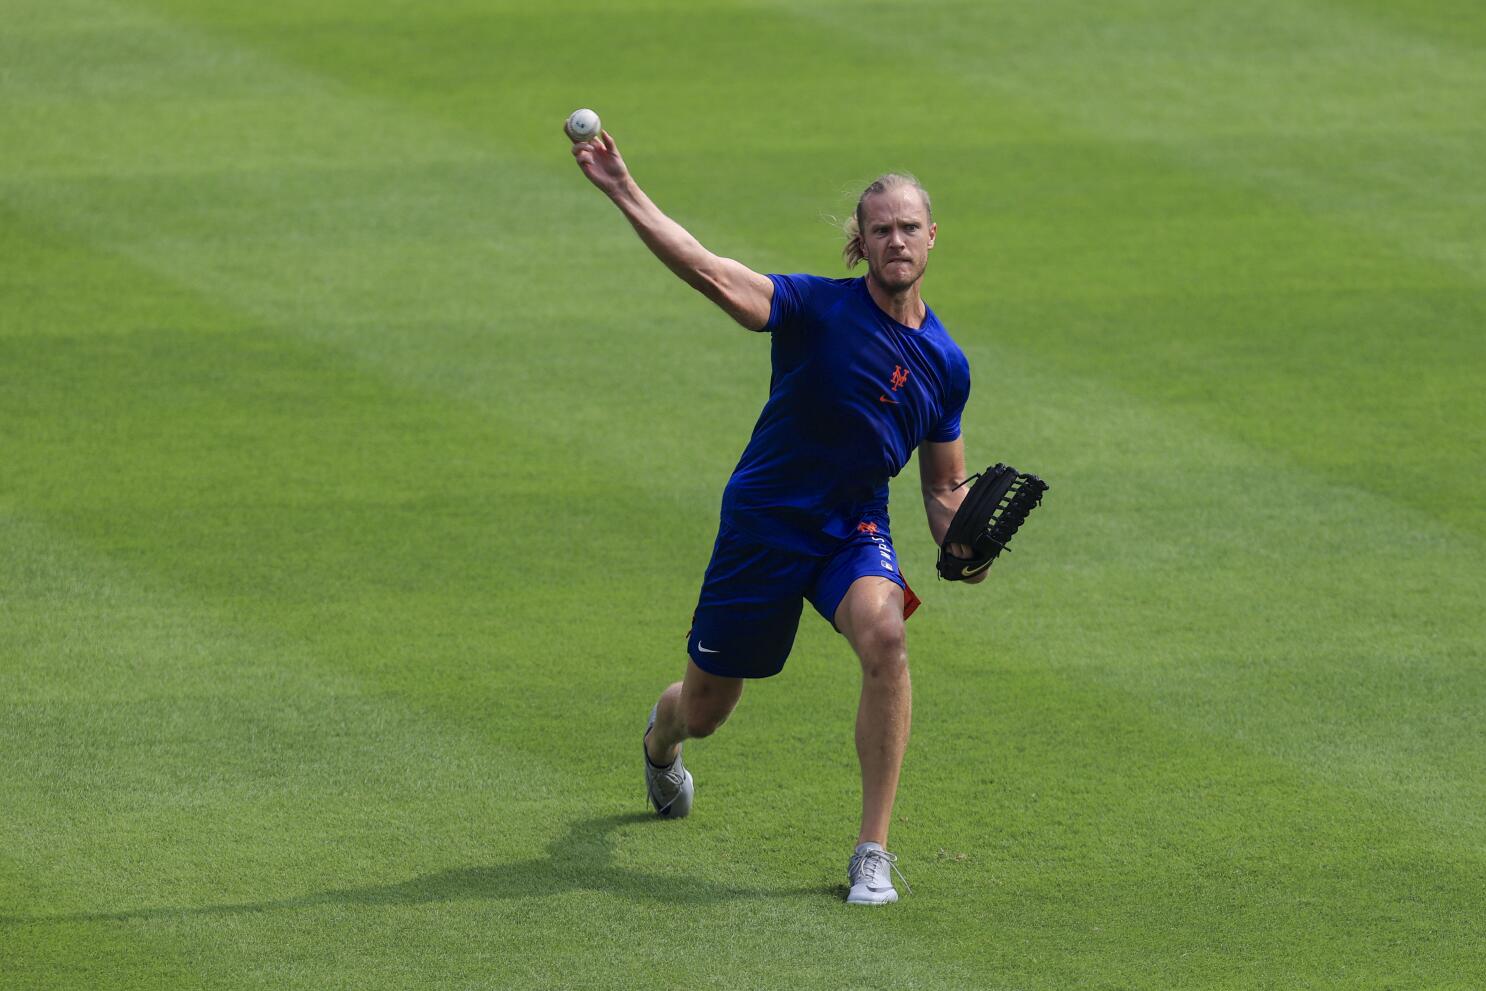 Noah Syndergaard looking like the real deal - Newsday